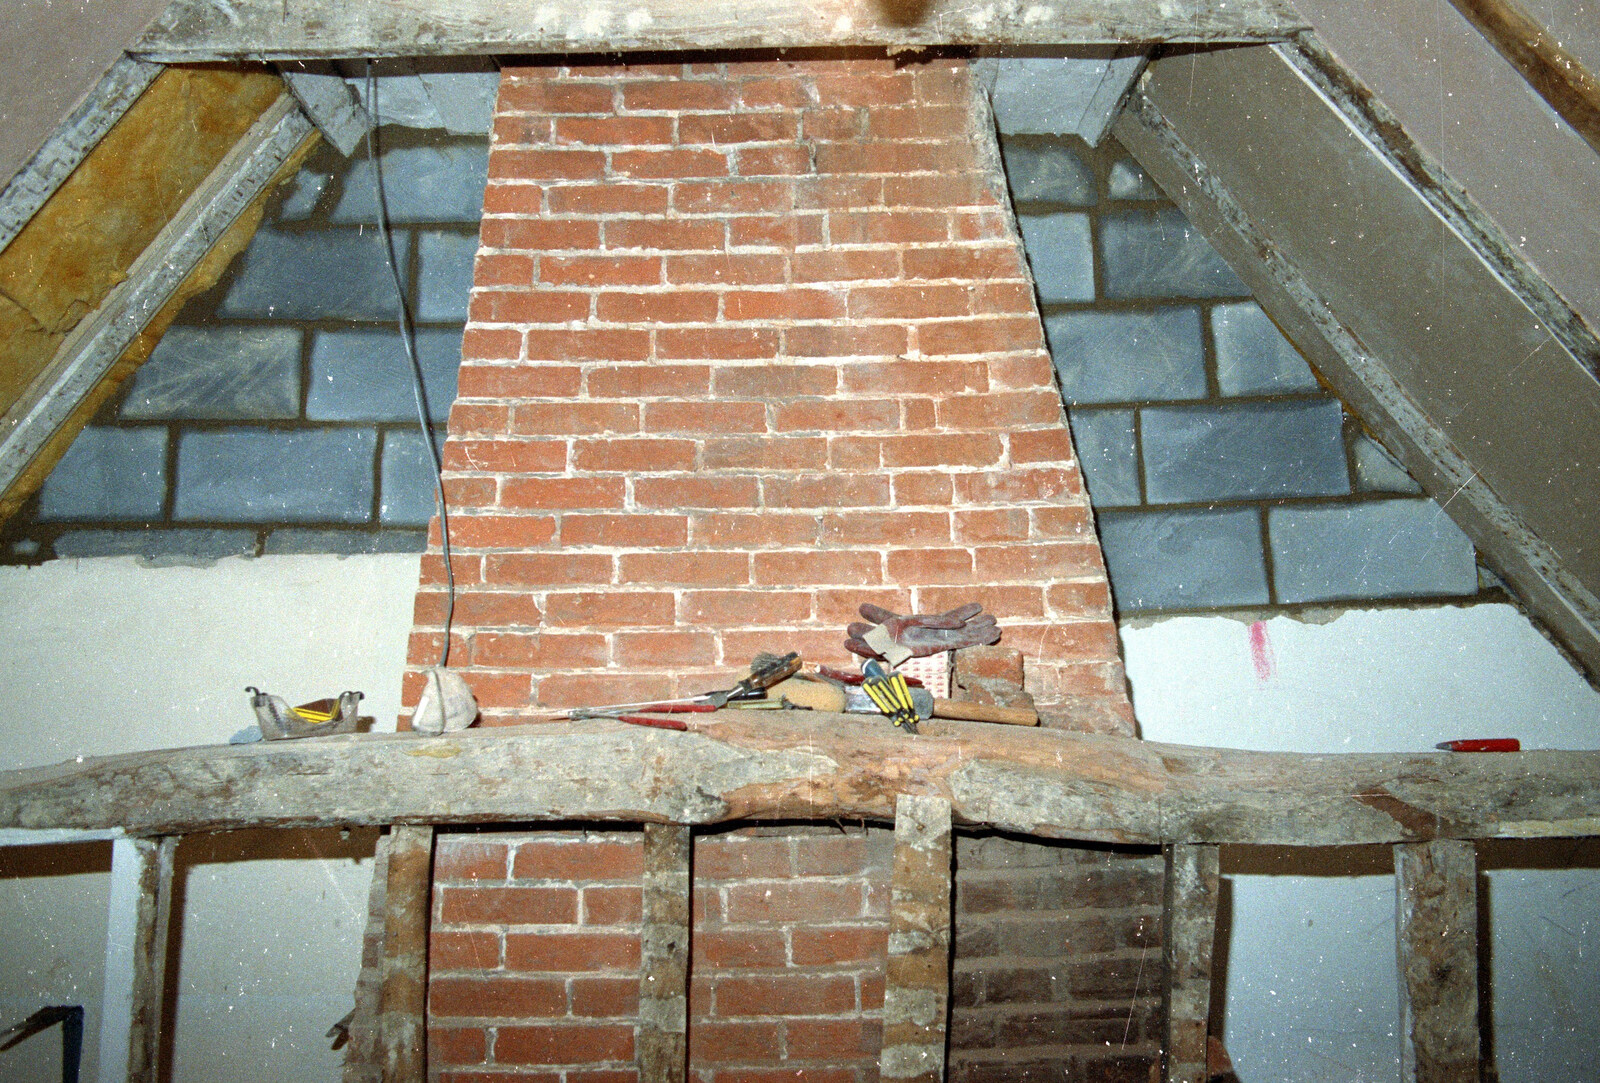 The wall is extended up to the original ceiling from Bedroom Demolition, Brome, Suffolk - 10th October 1994